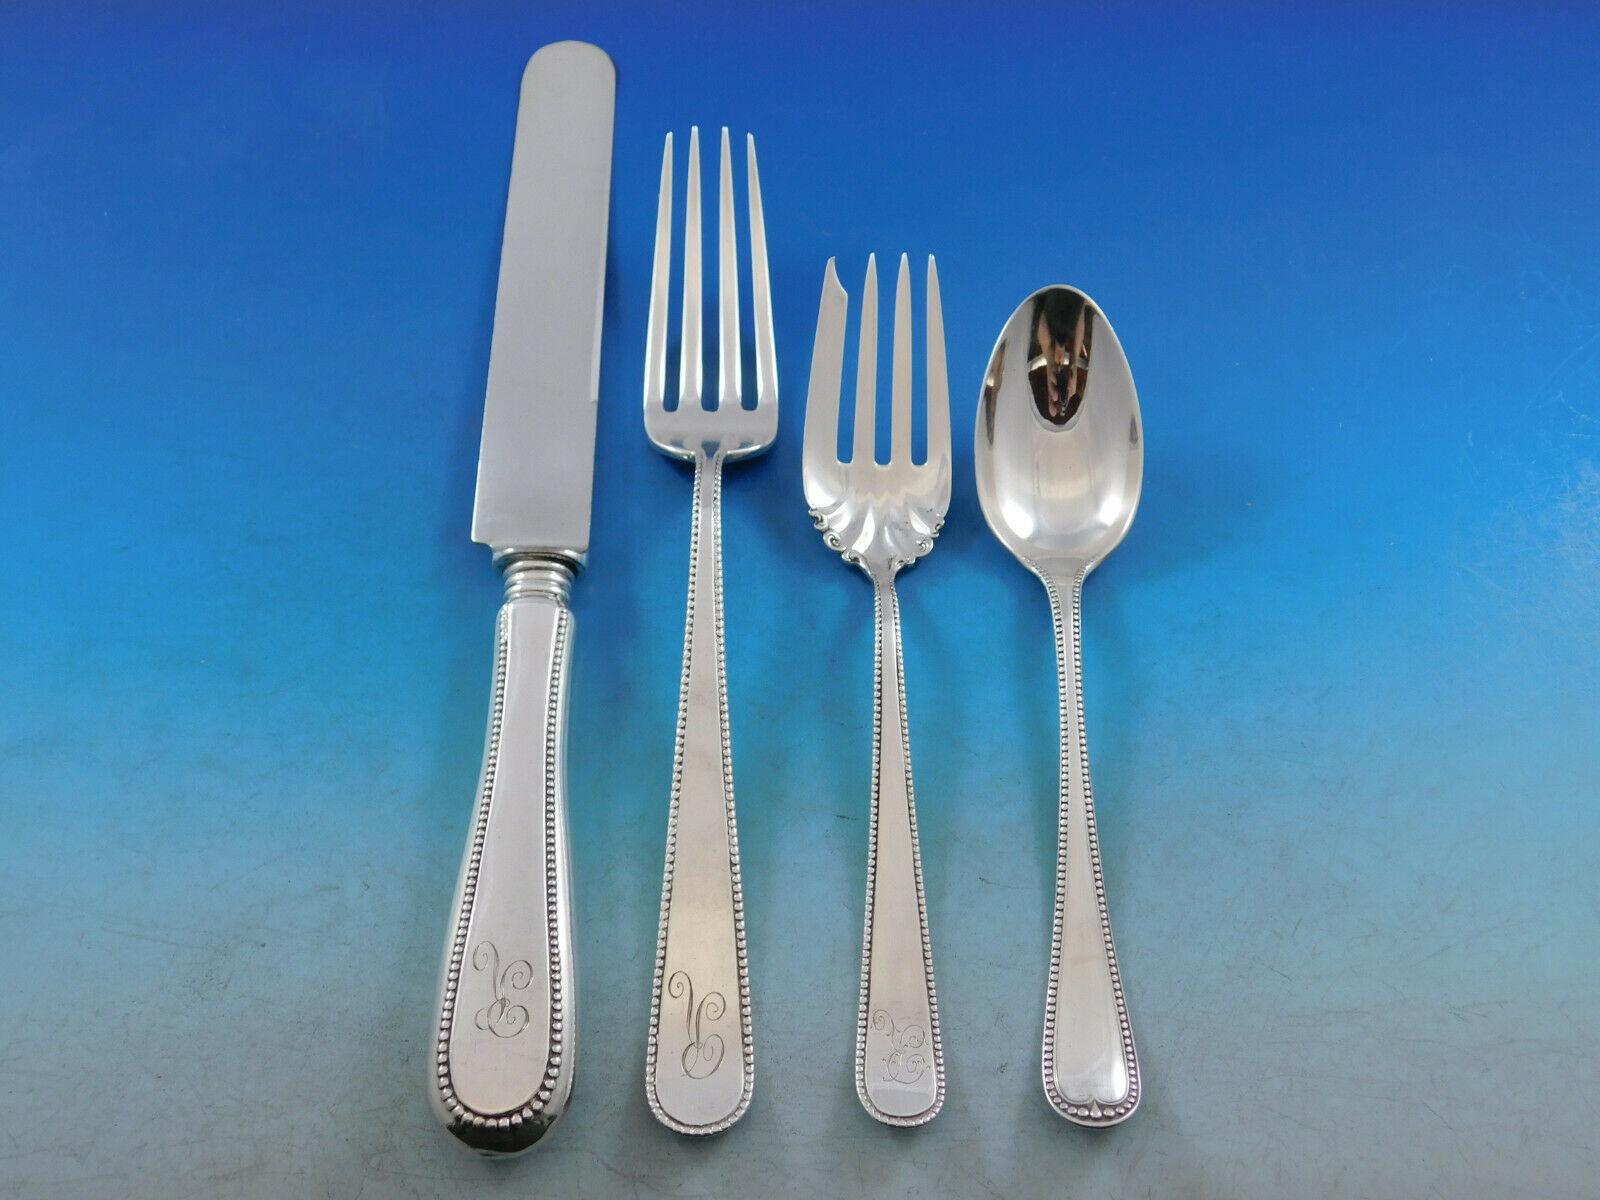 Stunning Bead by Davis & Galt Sterling Silver Flatware - 38 piece set. This set includes:

6 Dinner size knives, 9 7/8